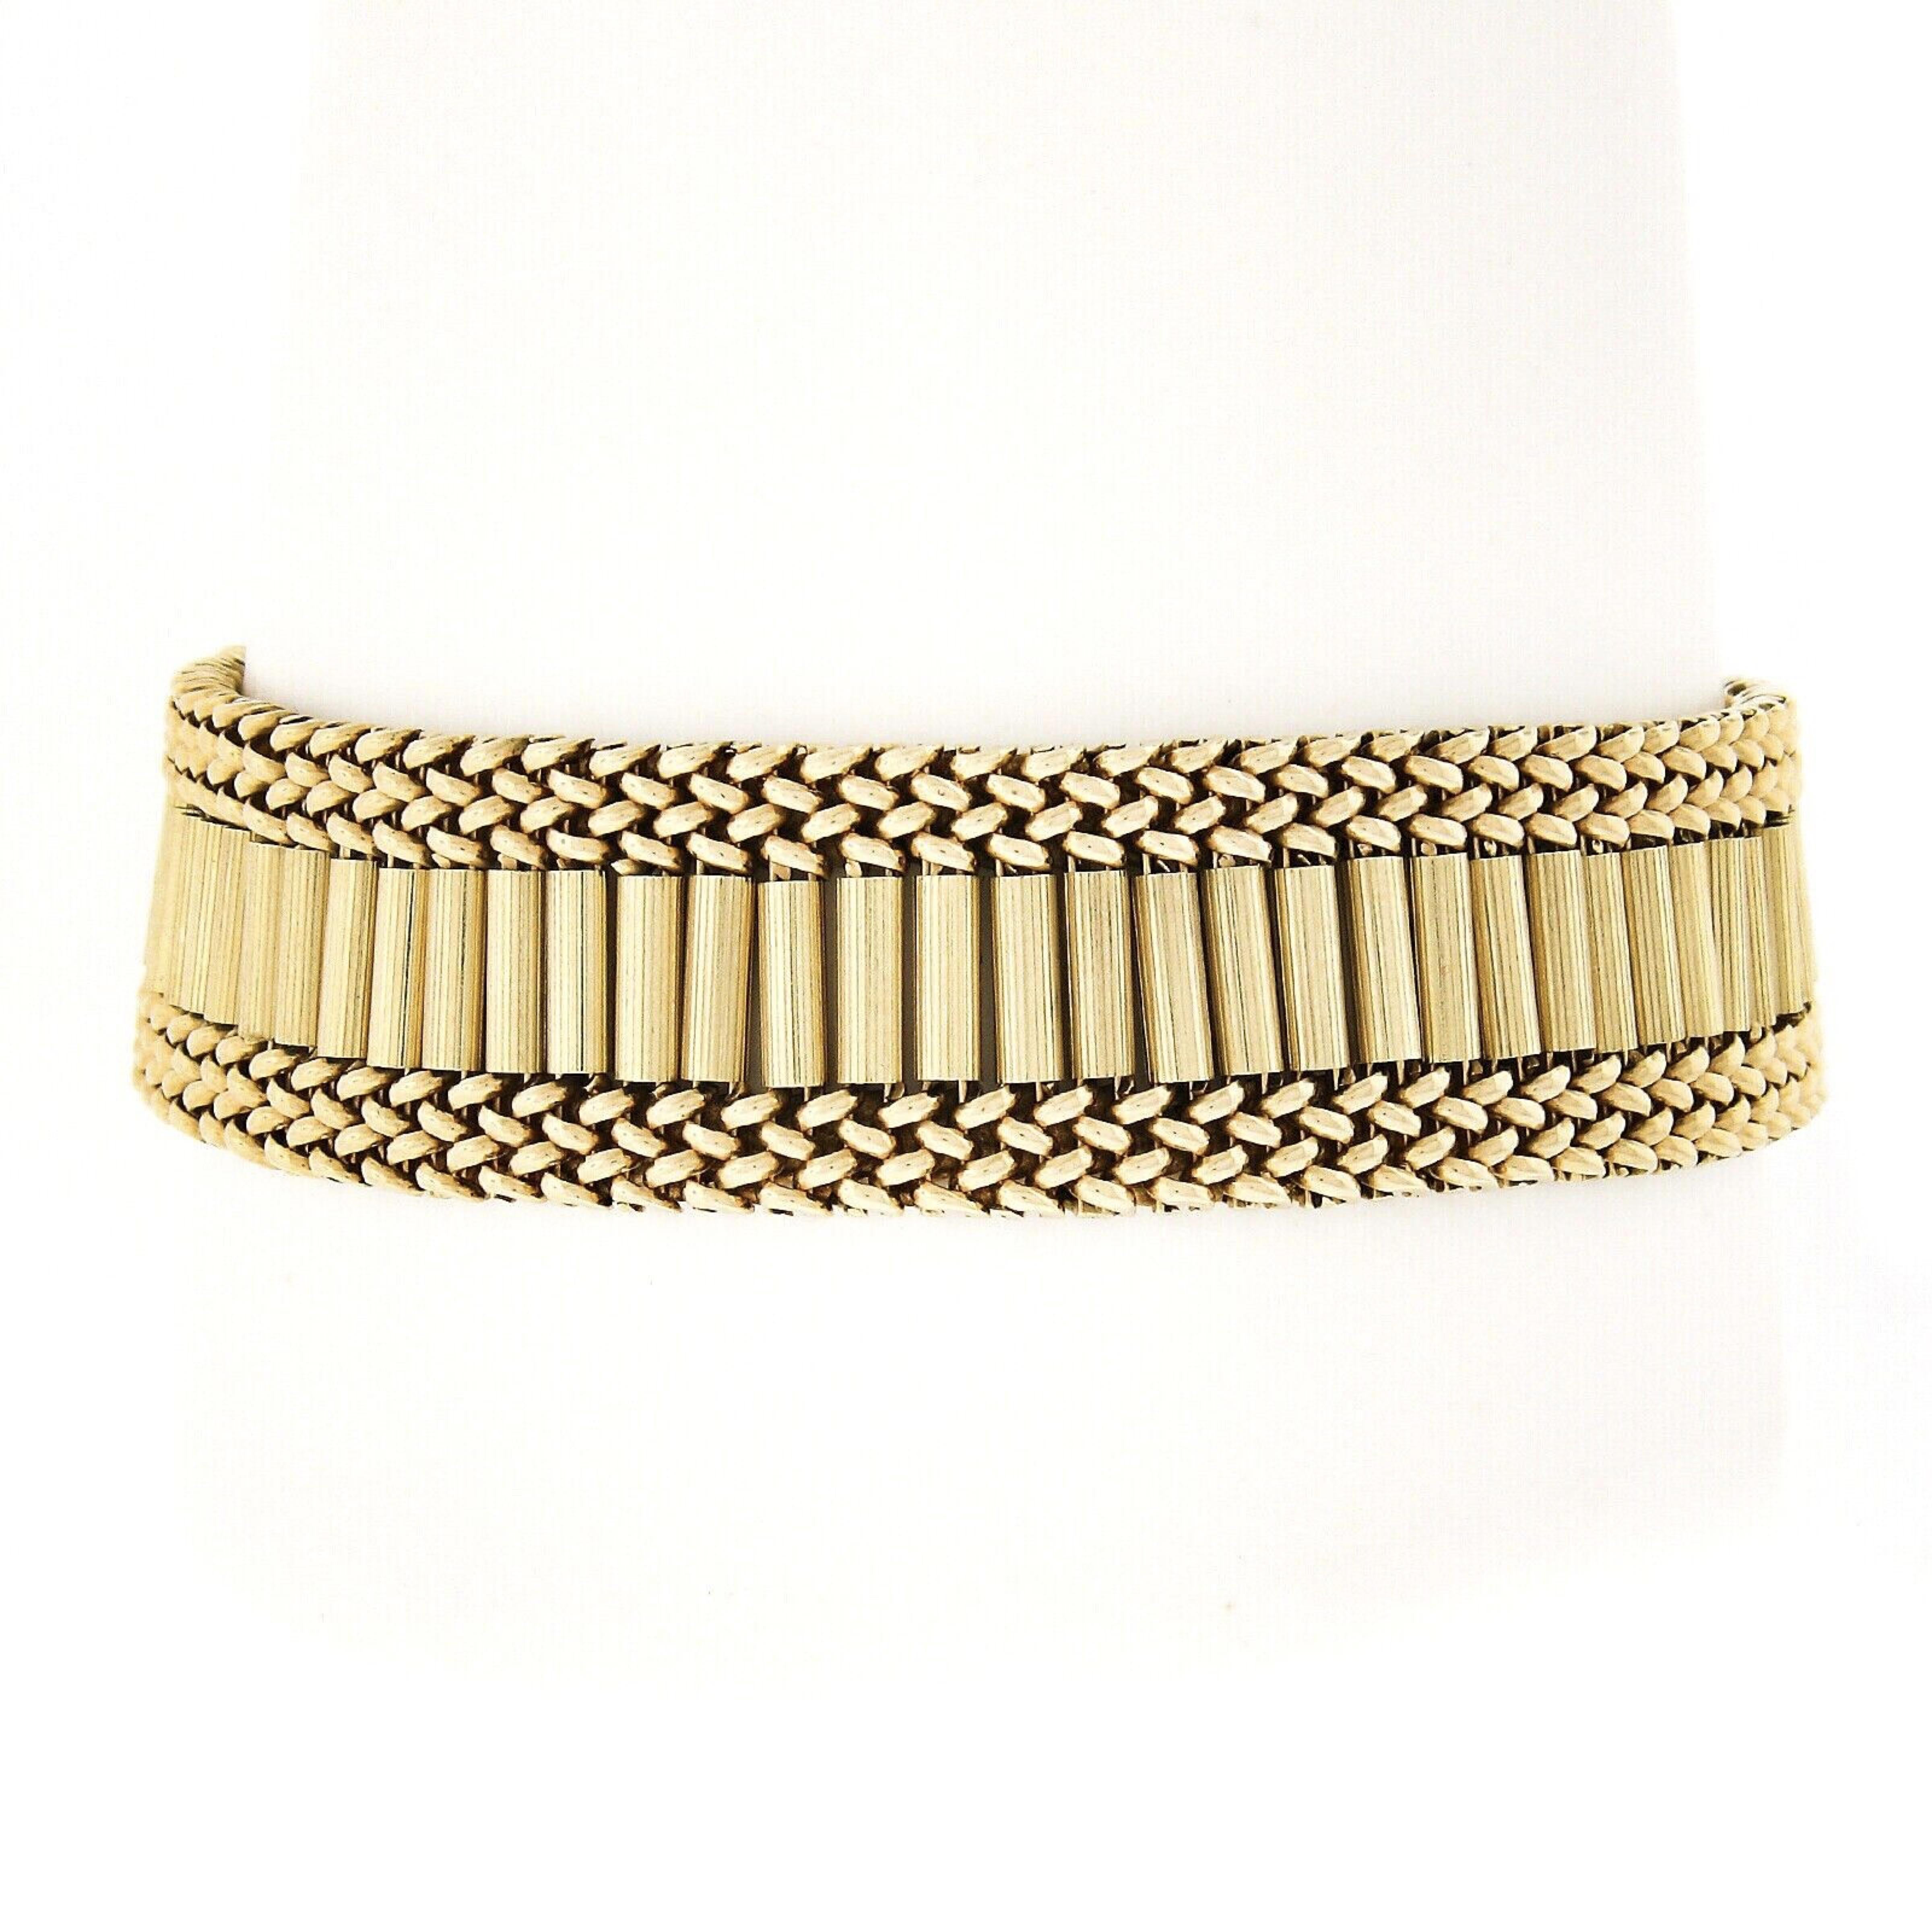 You are looking at a gorgeous and very well made vintage strap bracelet that was crafted in solid 14k yellow gold featuring a magnificent Victorian revival design. The wide strap is constructed from neatly set polished braided links and textured bar